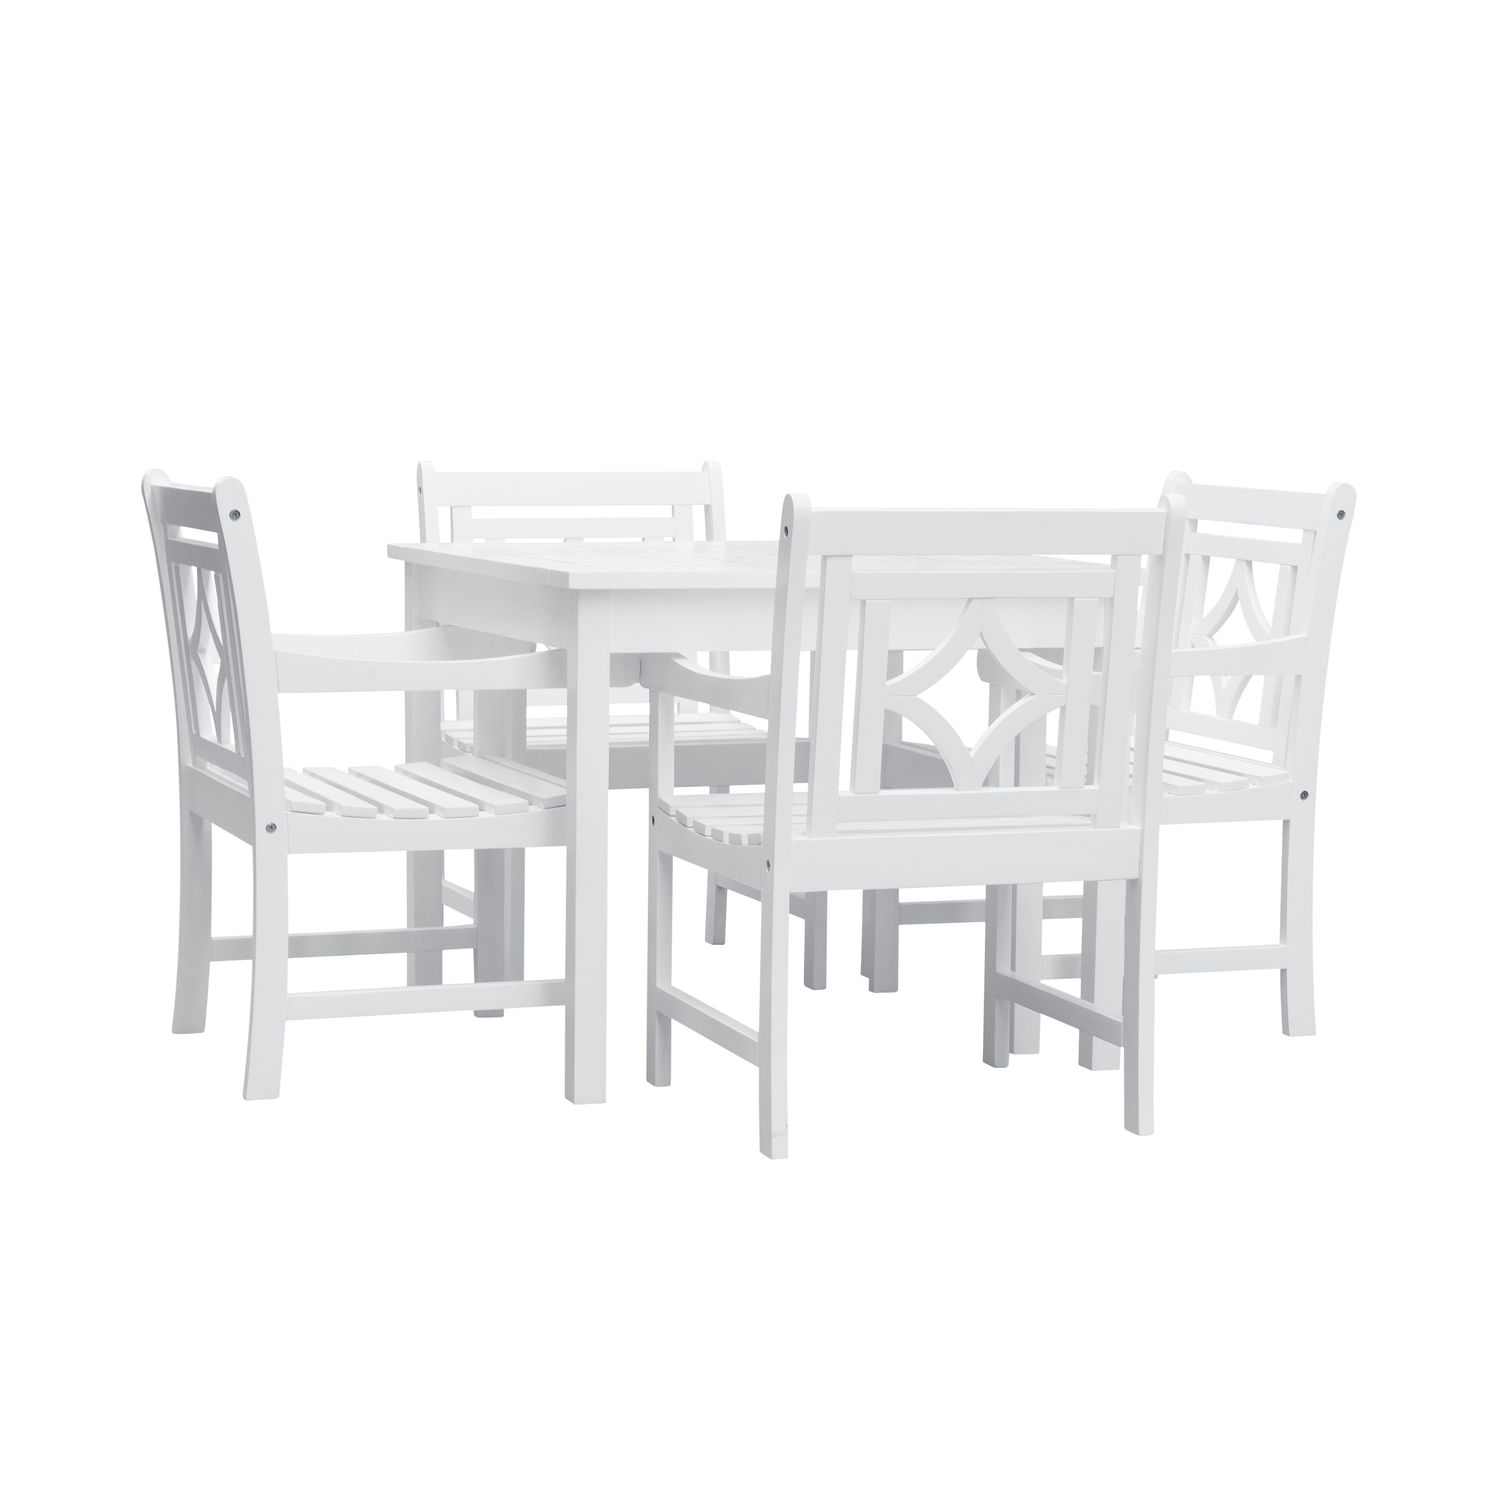 Bradley Outdoor 5-piece Wood Patio Stacking Table Dining Set